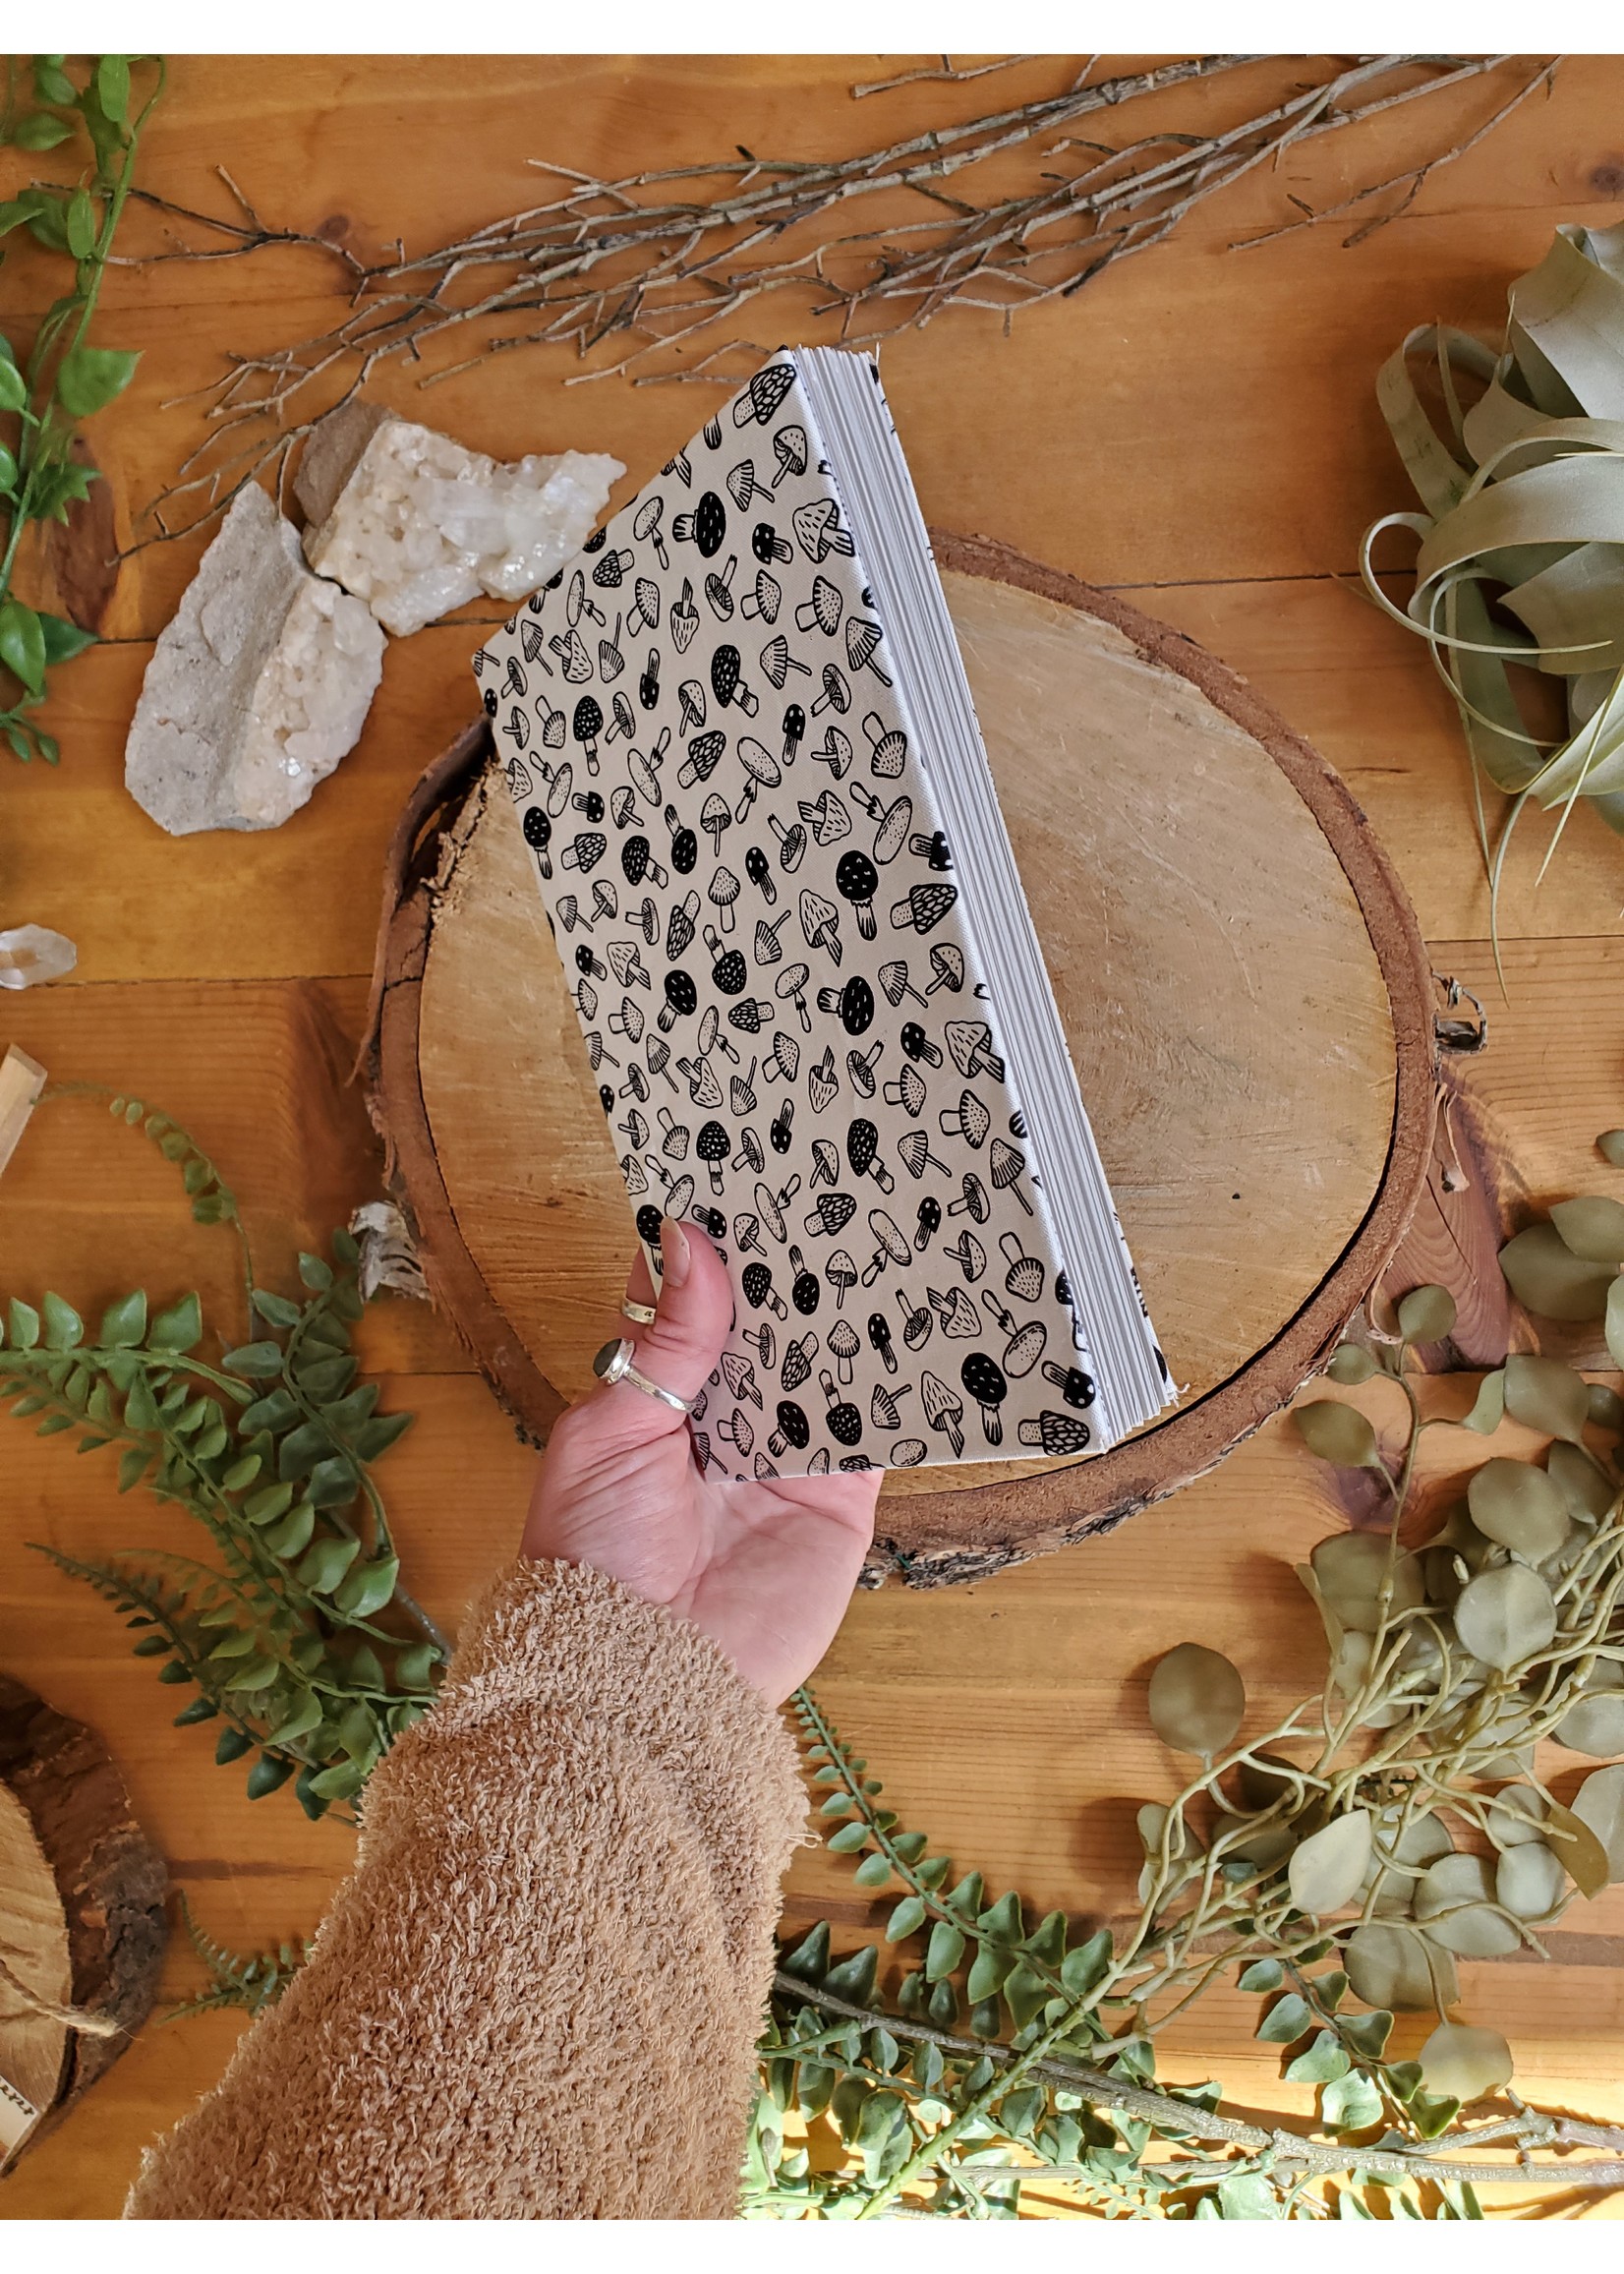 For Simplicities Sake: Hand-Bound Fabric Journal